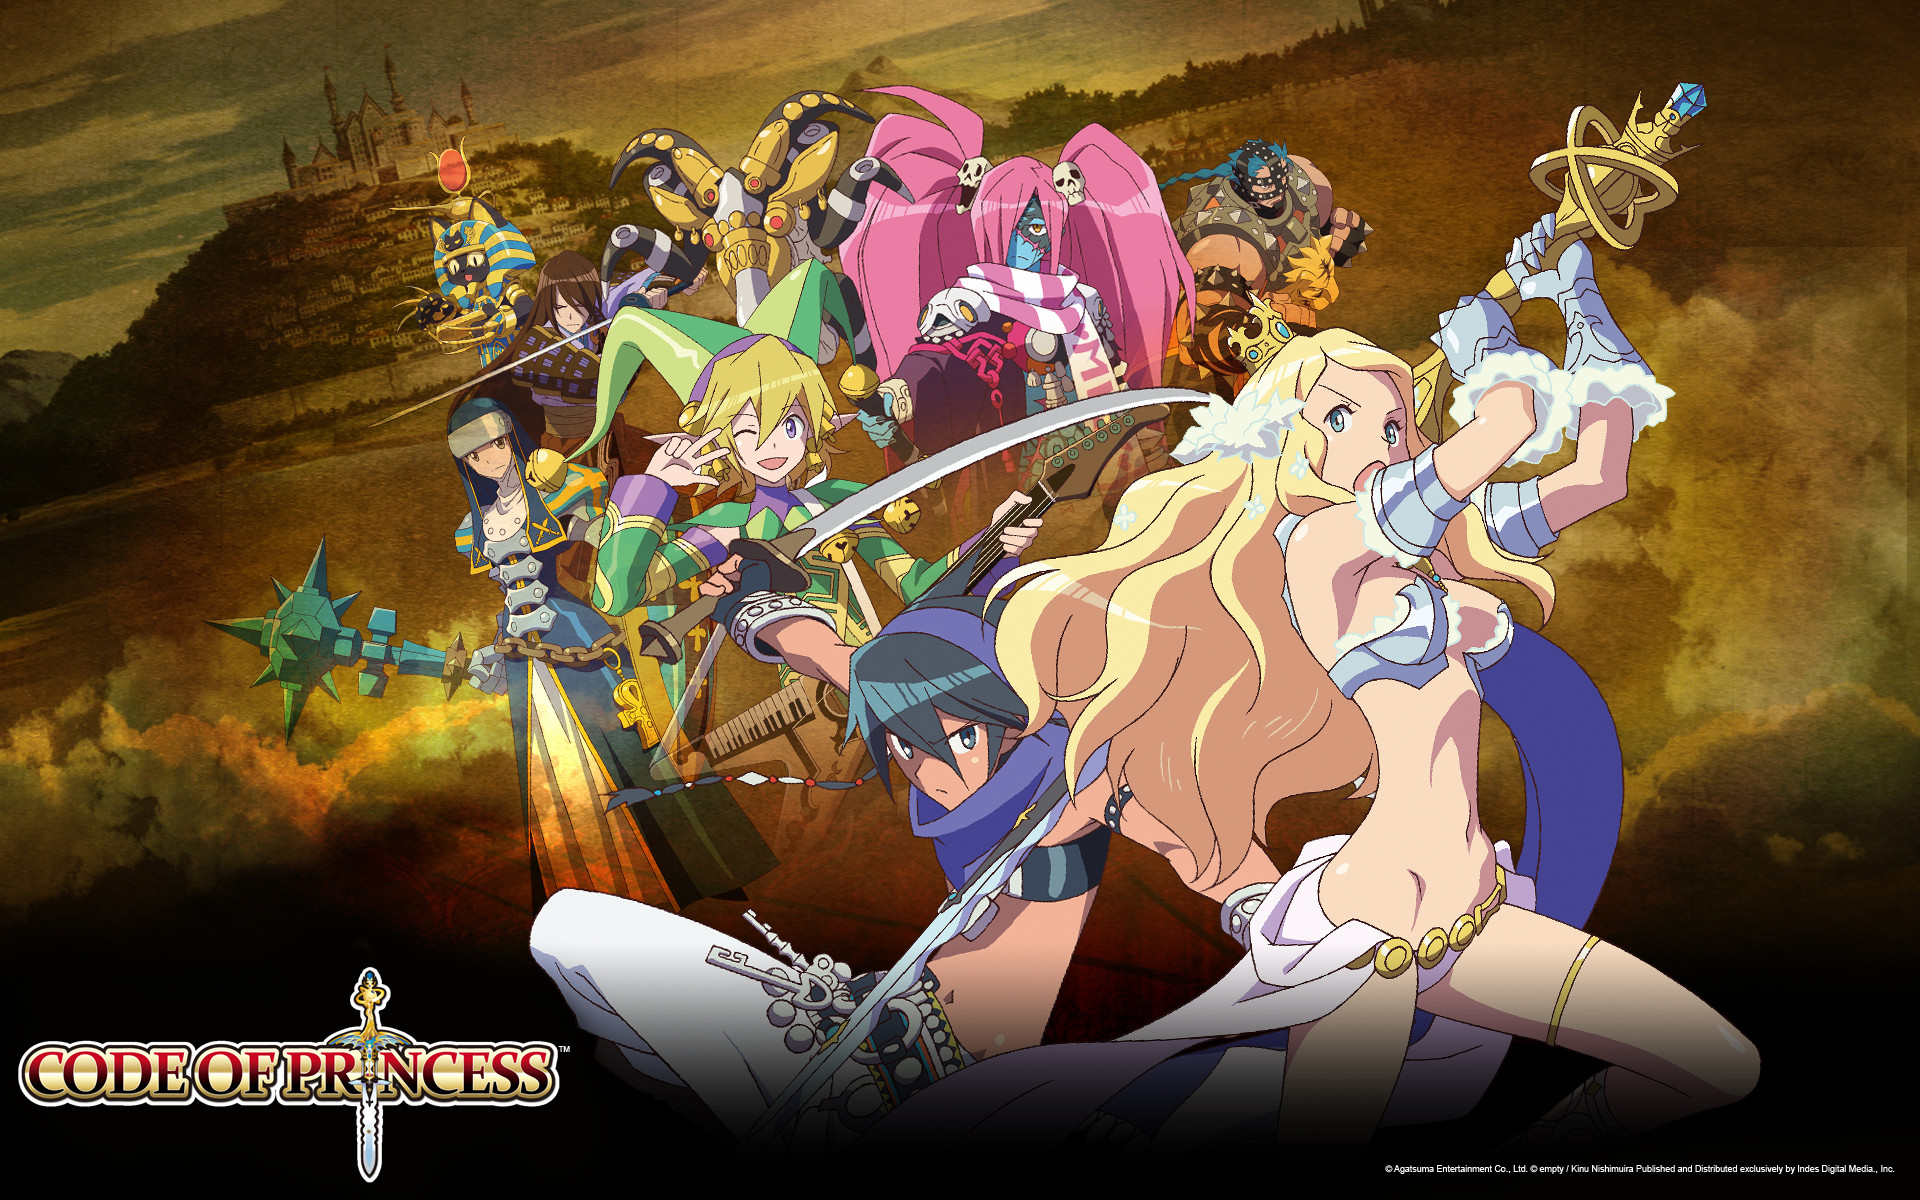 1920x1200 Code of Princess, the 3D beat-em-up/RPG for Nintendo 3DS! Available Now.